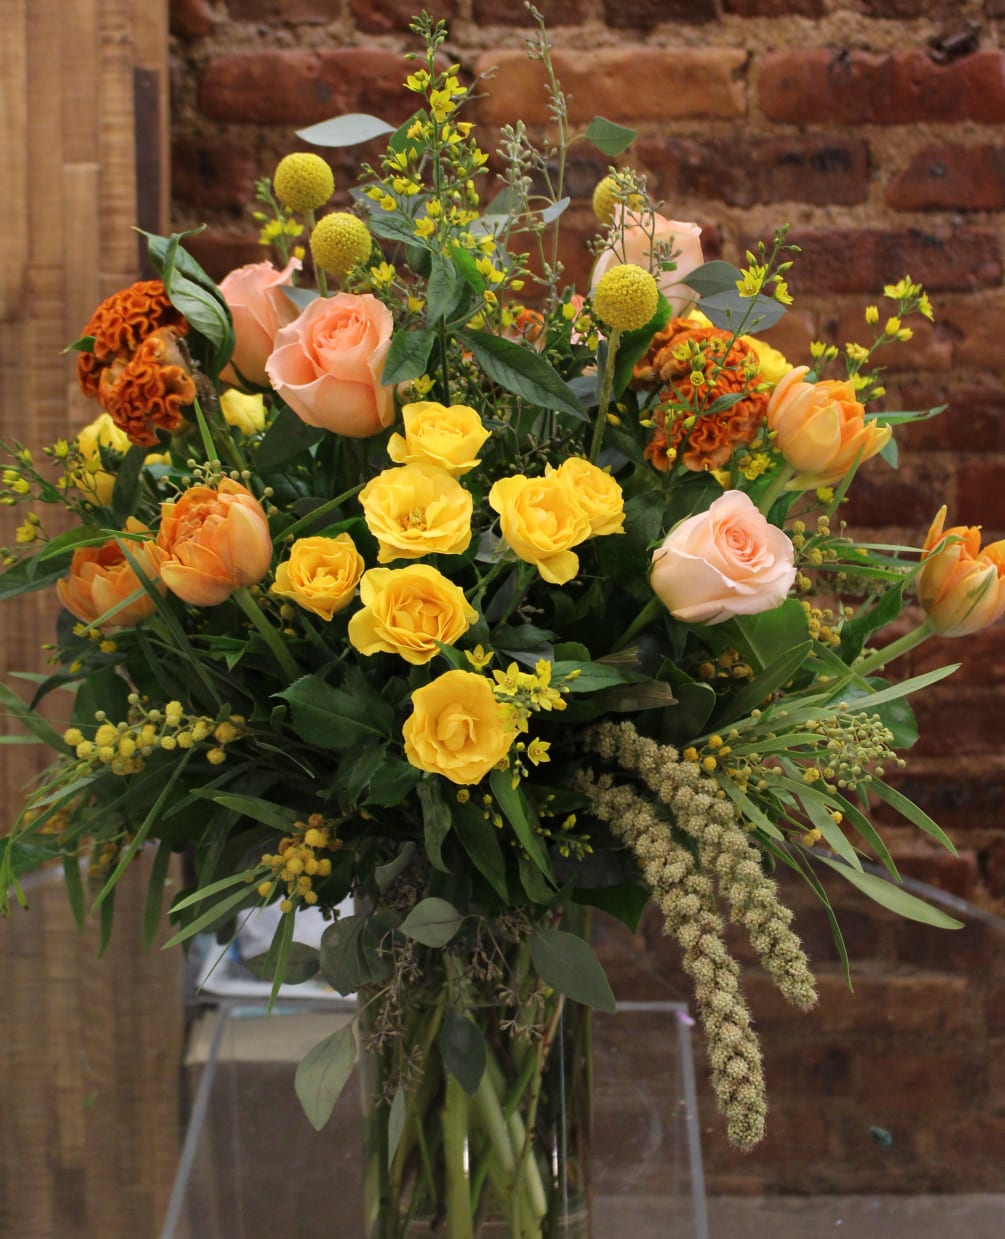 An Organic display of fresh yellows, peaches and oranges, with decadent lush